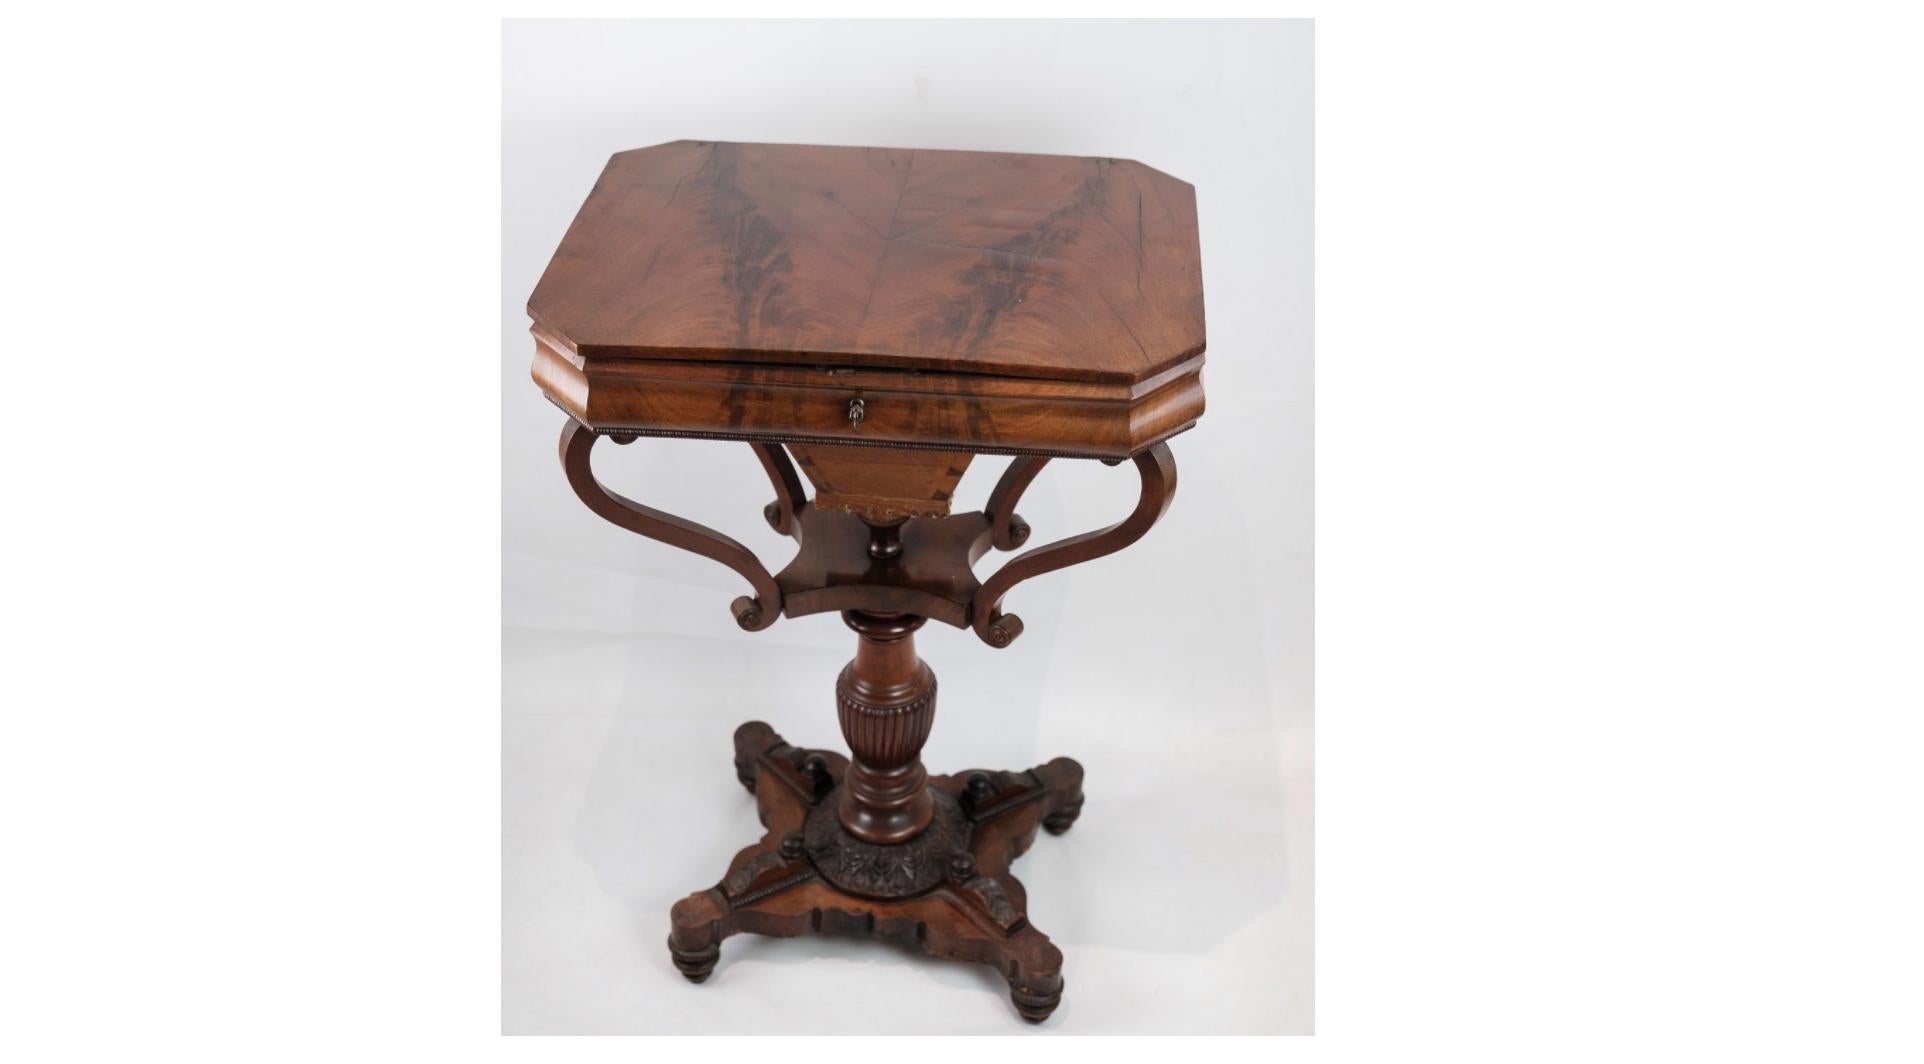 Renaissance Antique Mahogany Sewing Table on a Pillar From 1840s For Sale